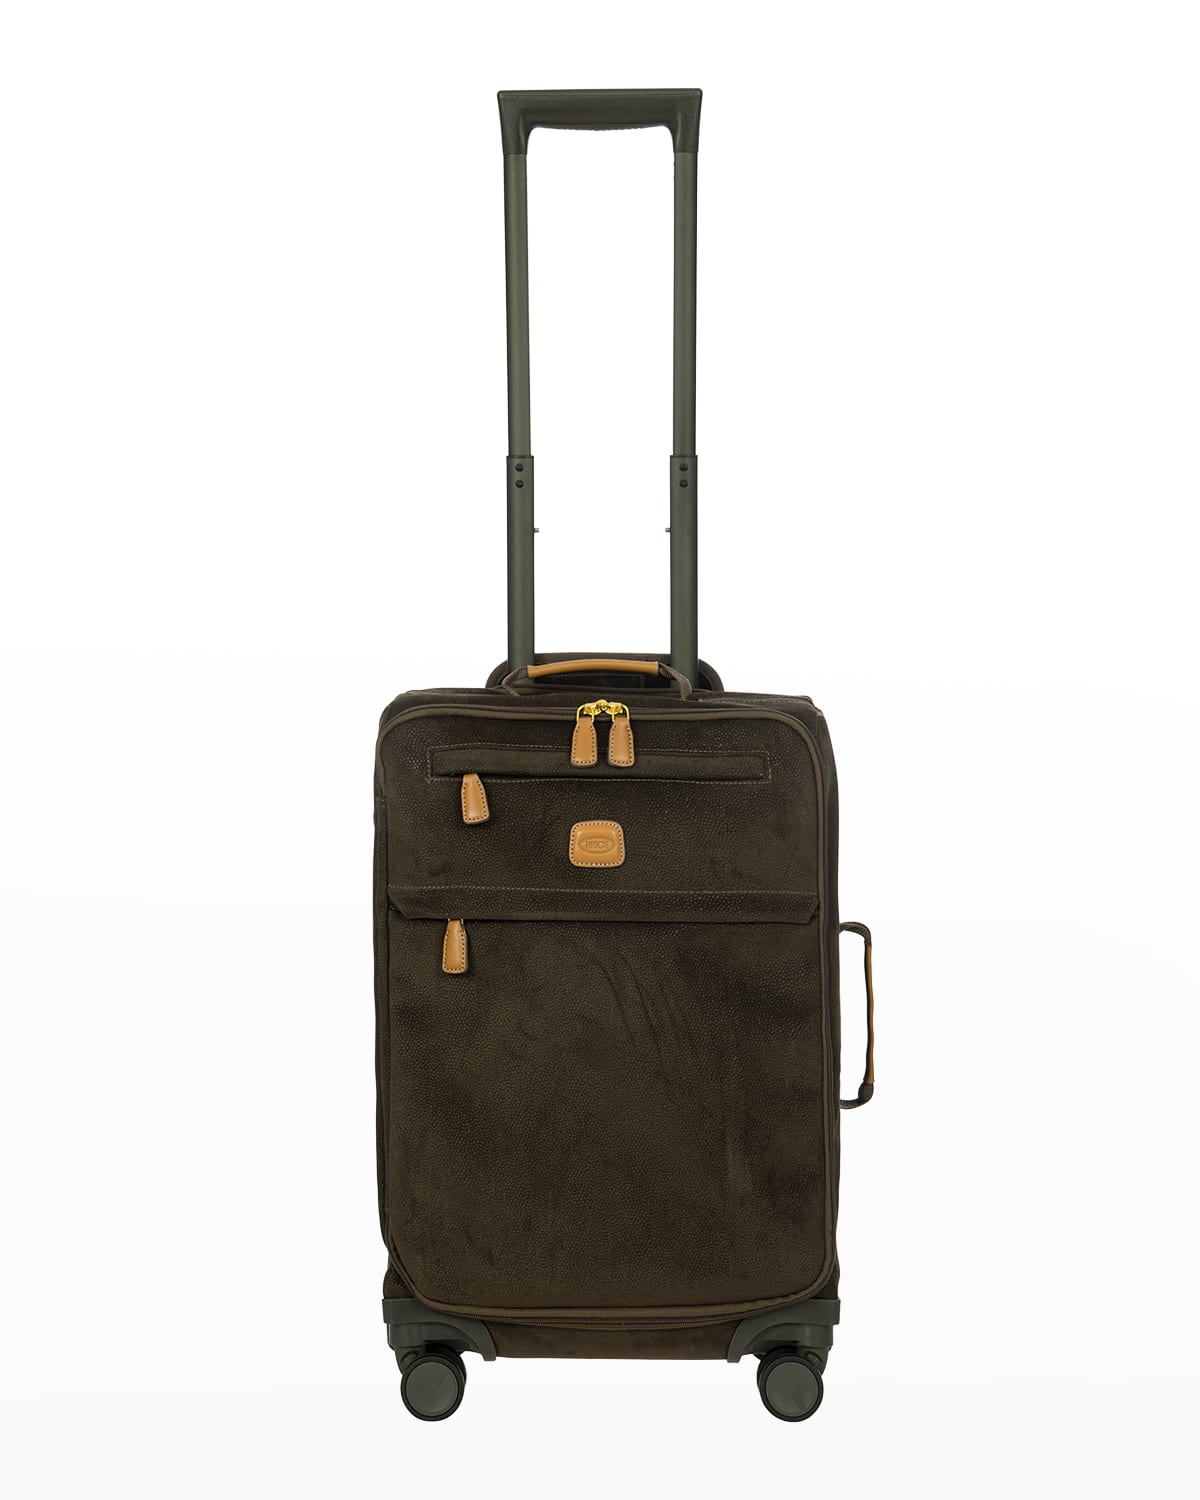 Bric's Life Tropea 21" Carry-On Spinner Luggage